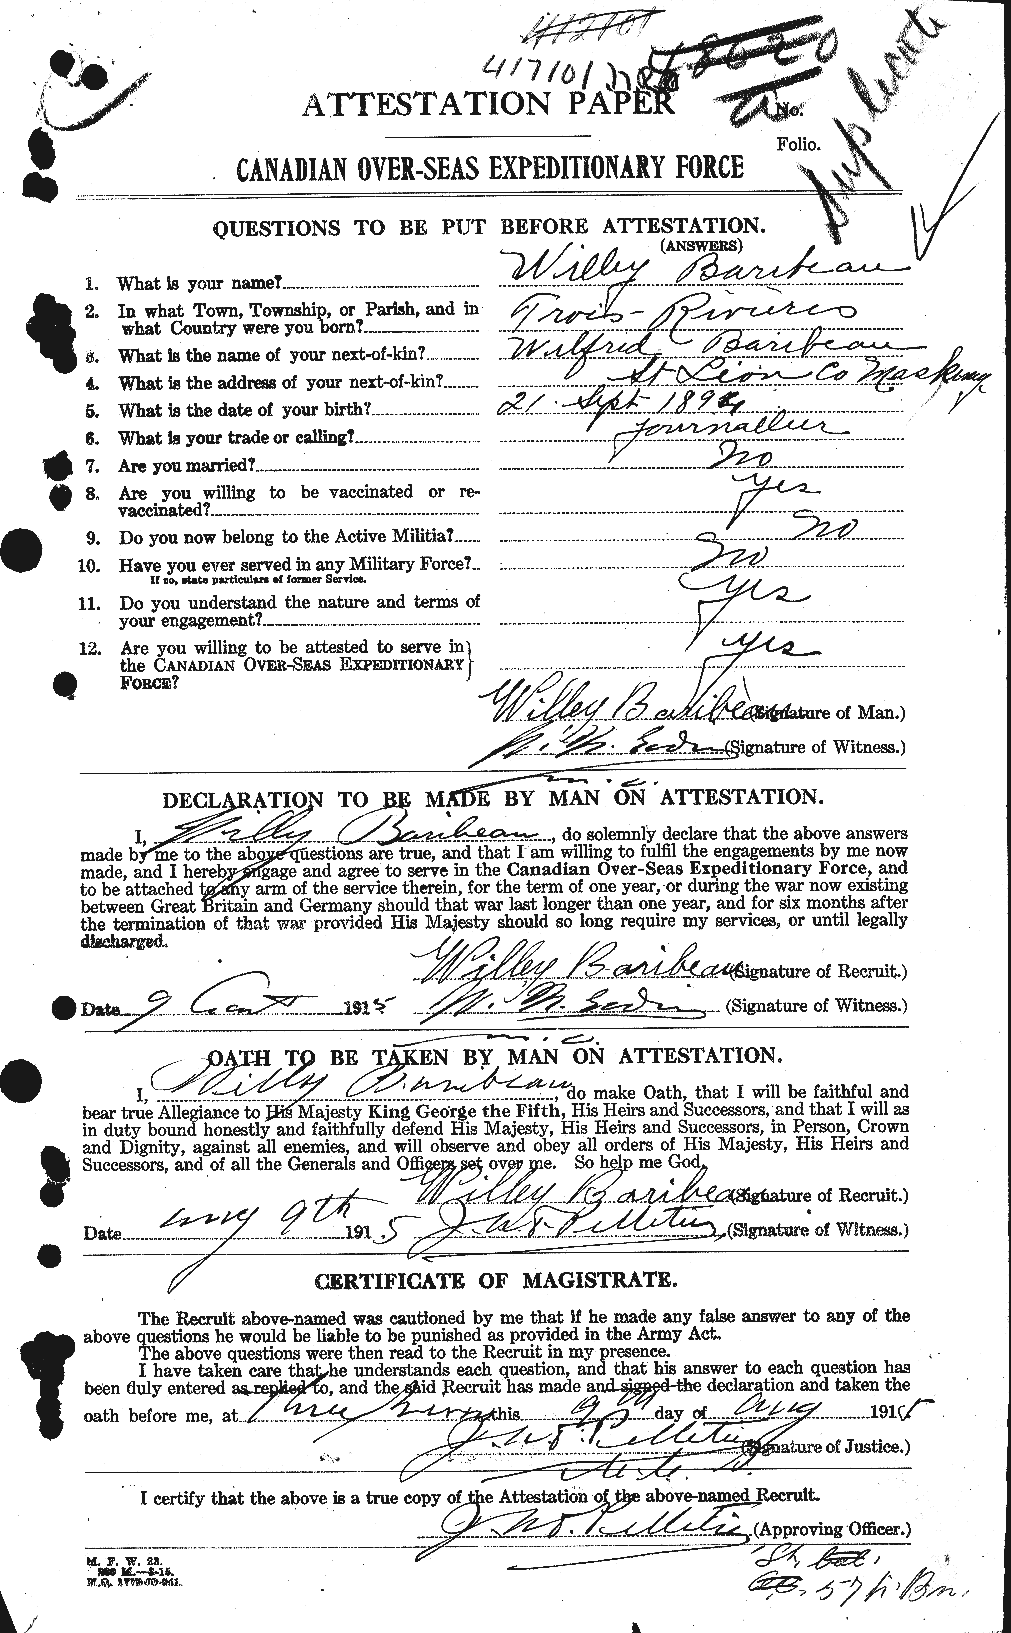 Personnel Records of the First World War - CEF 220627a